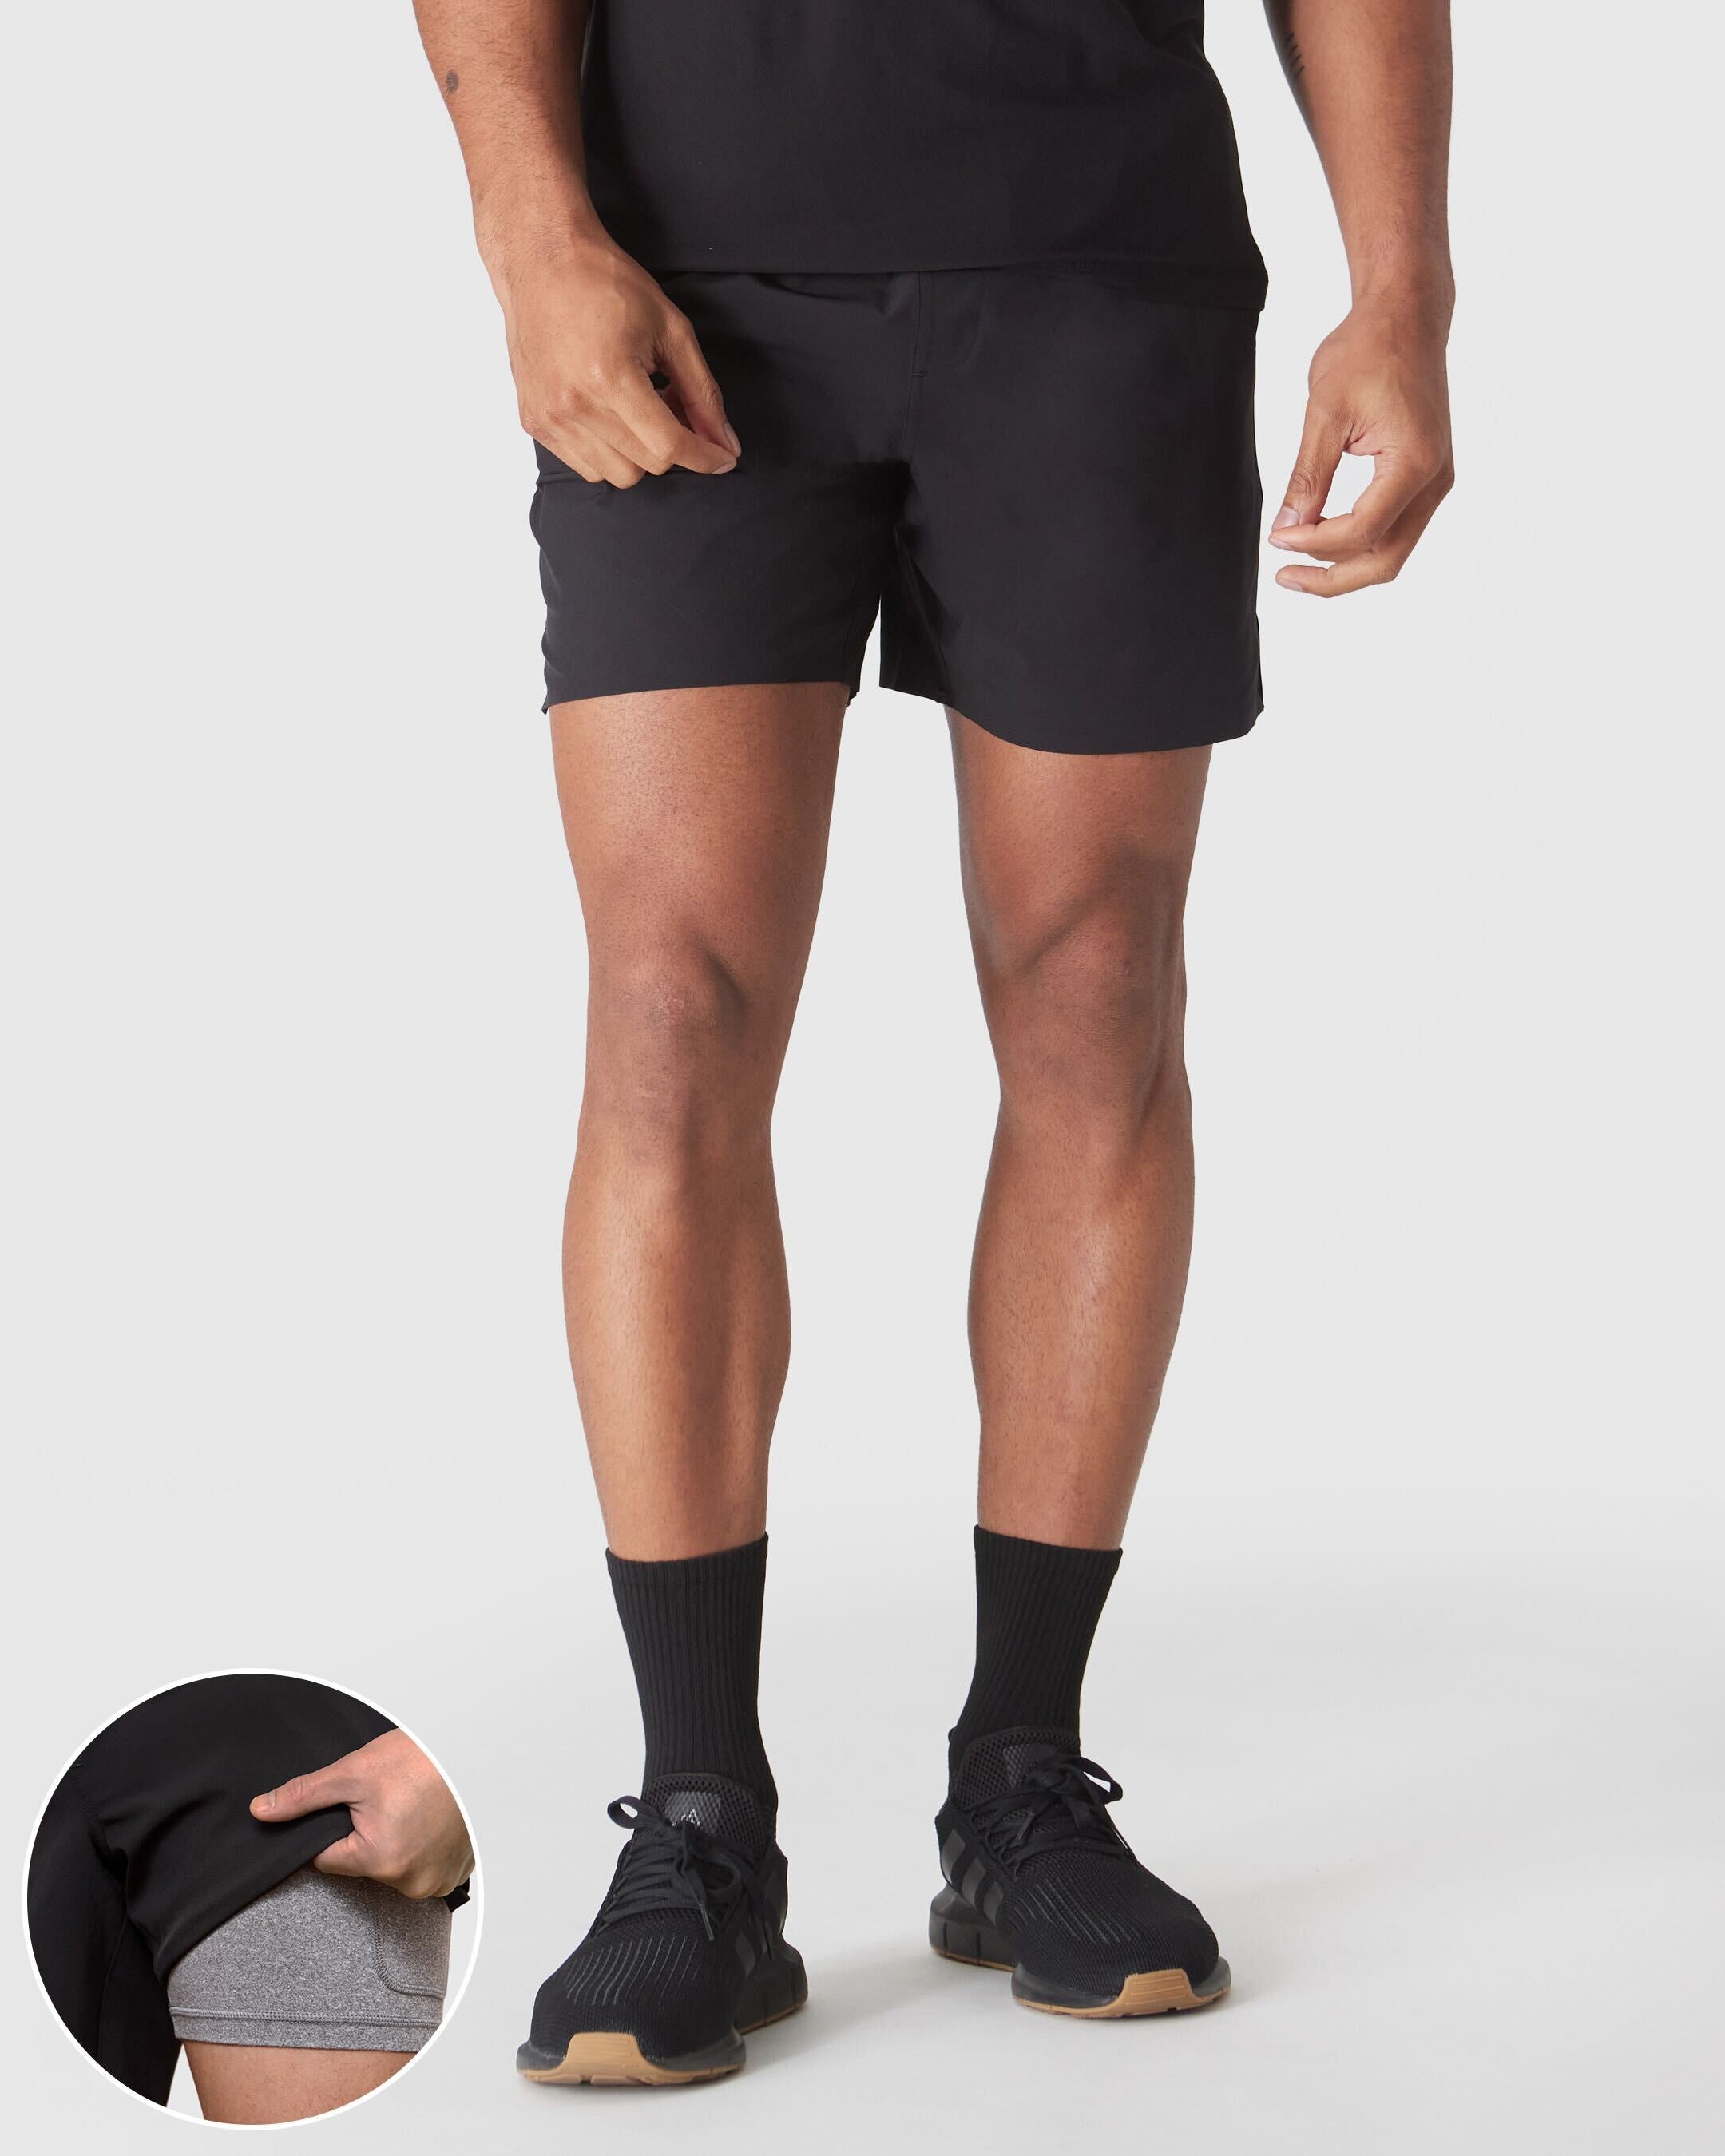 Black & Carbon 7" 2-In-1 Active Training Shorts 2-Pack